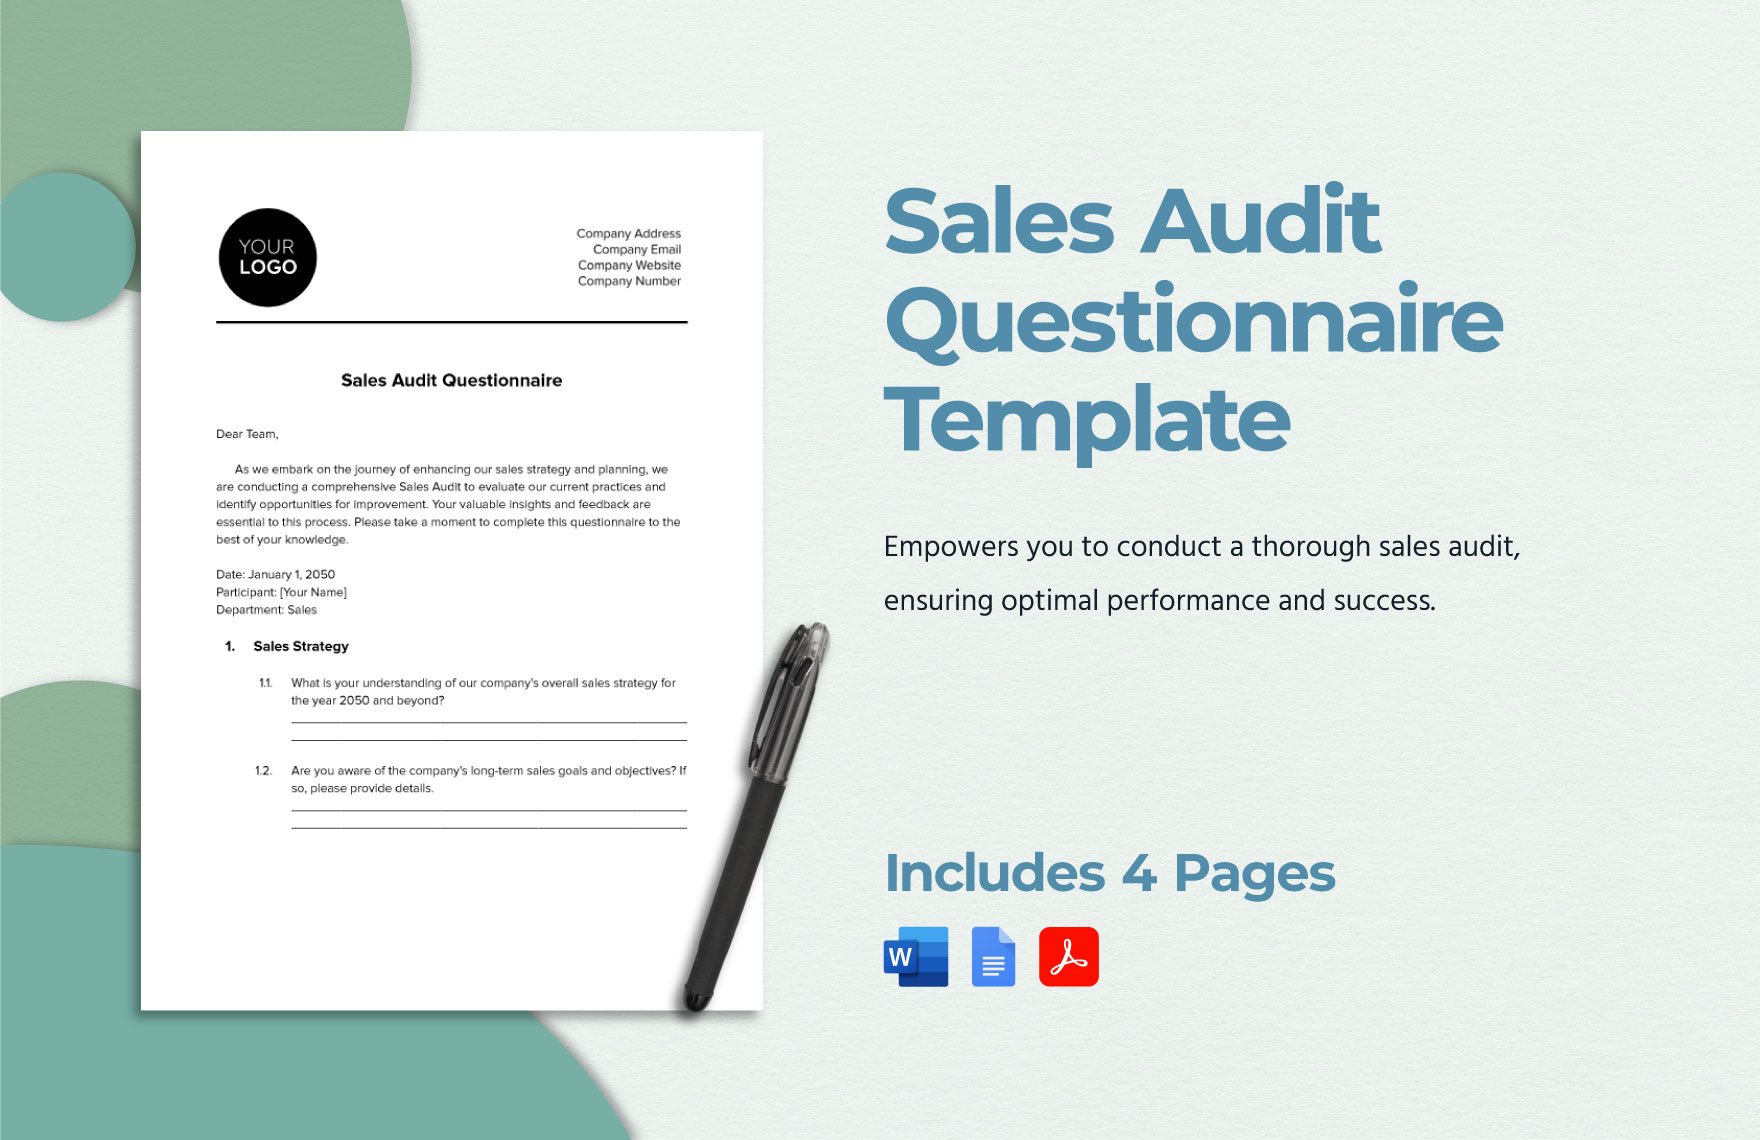 Sales Audit Questionnaire Template in Word, Google Docs, PDF